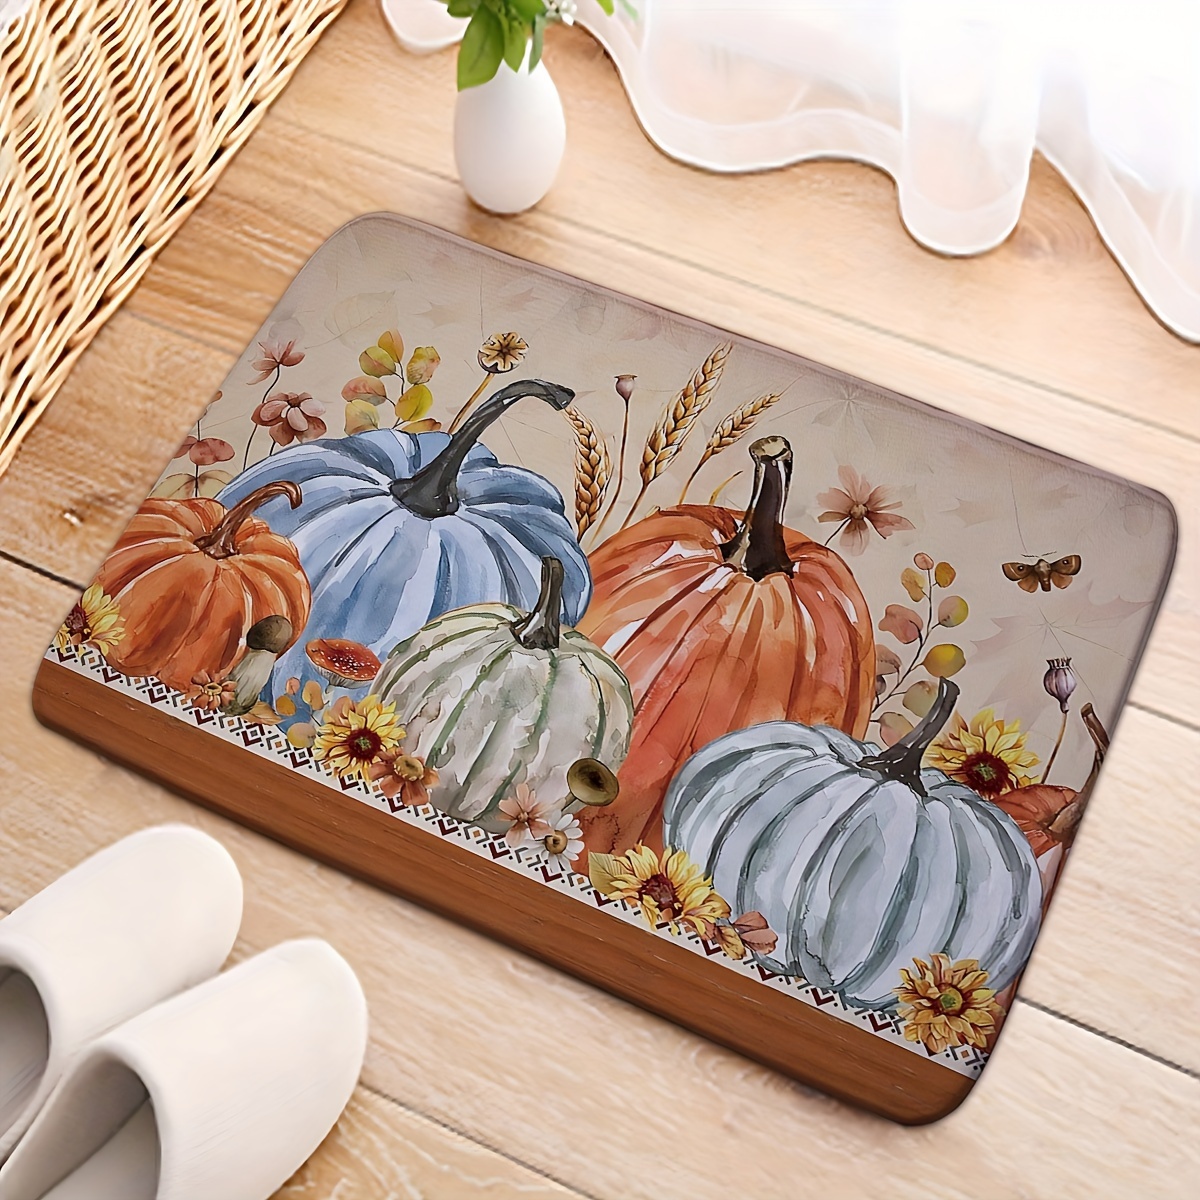 

Autumn Harvest Pumpkin Colorful Indoor Door Mat - Vintage, Non-slip & Quick Absorbent Entrance Rug, Perfect For Thanksgiving Decor, Machine Washable Polyester